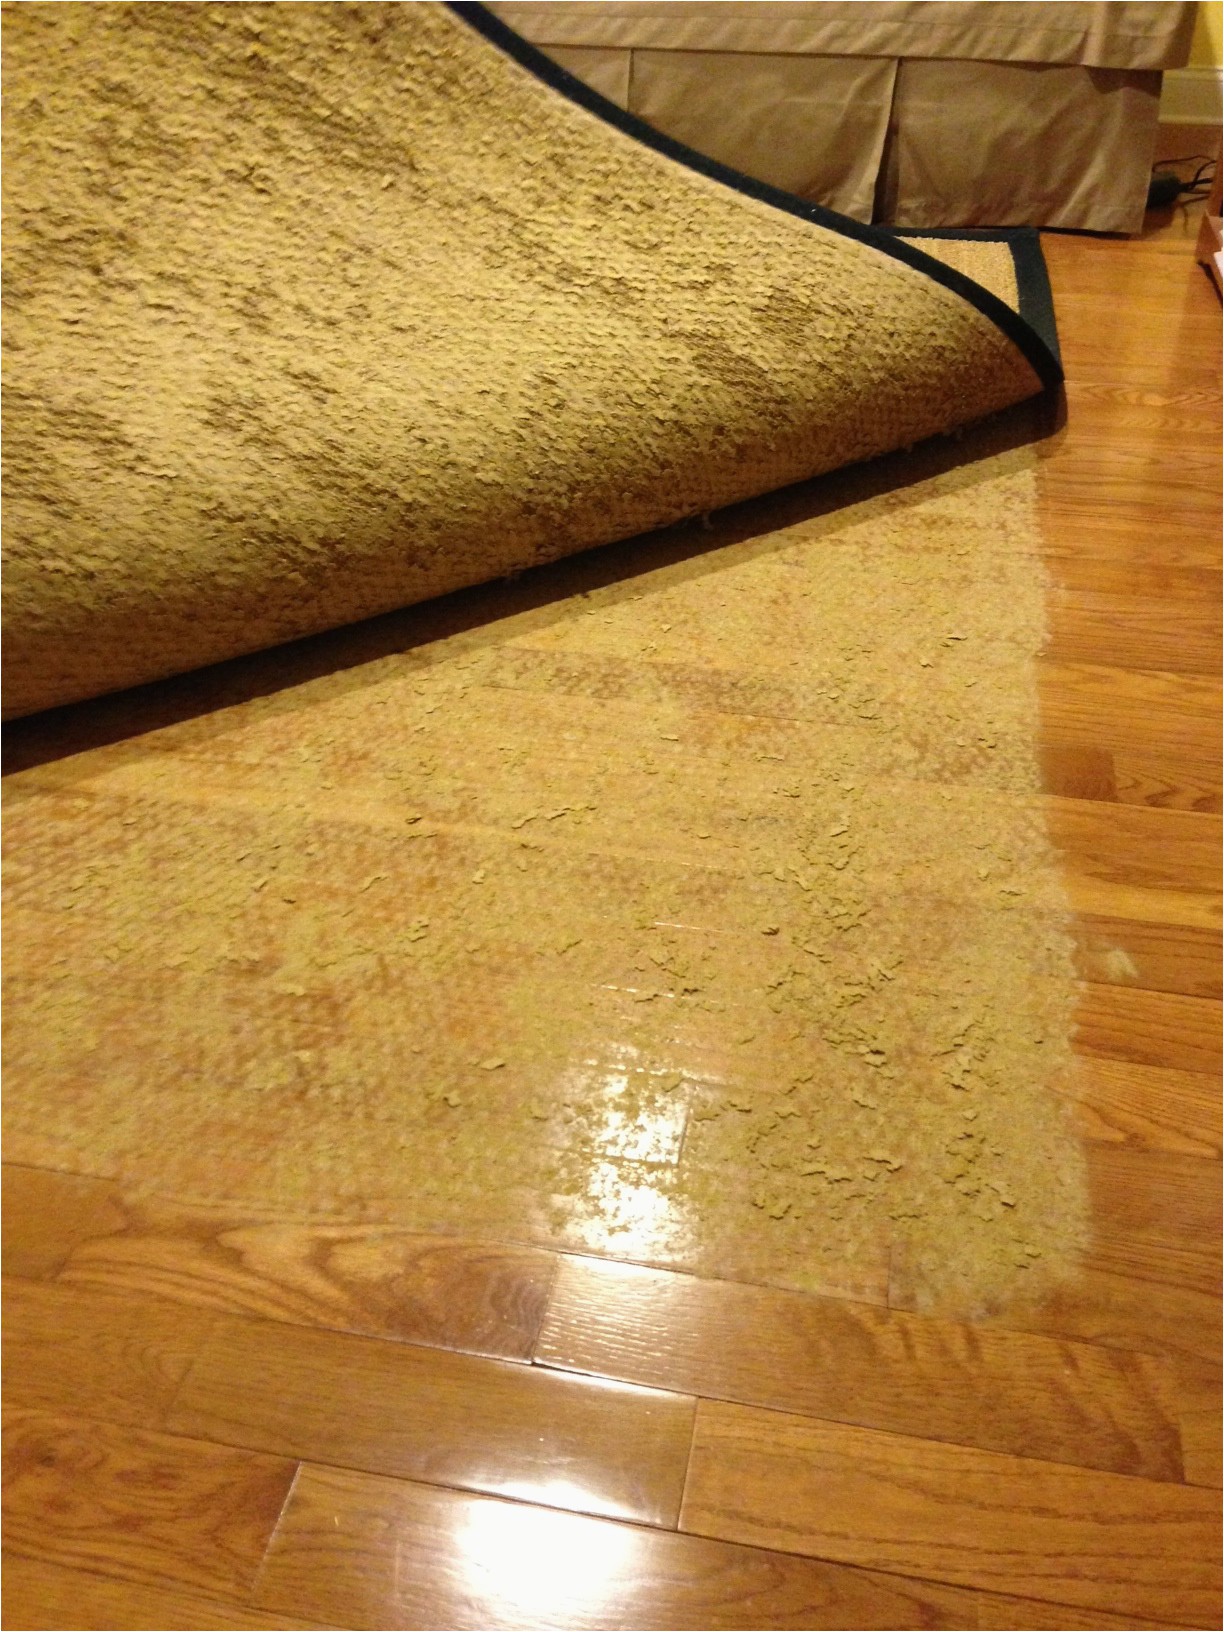 Rubber Mats for Under area Rugs Latex Rug Backing Stuck to Floor